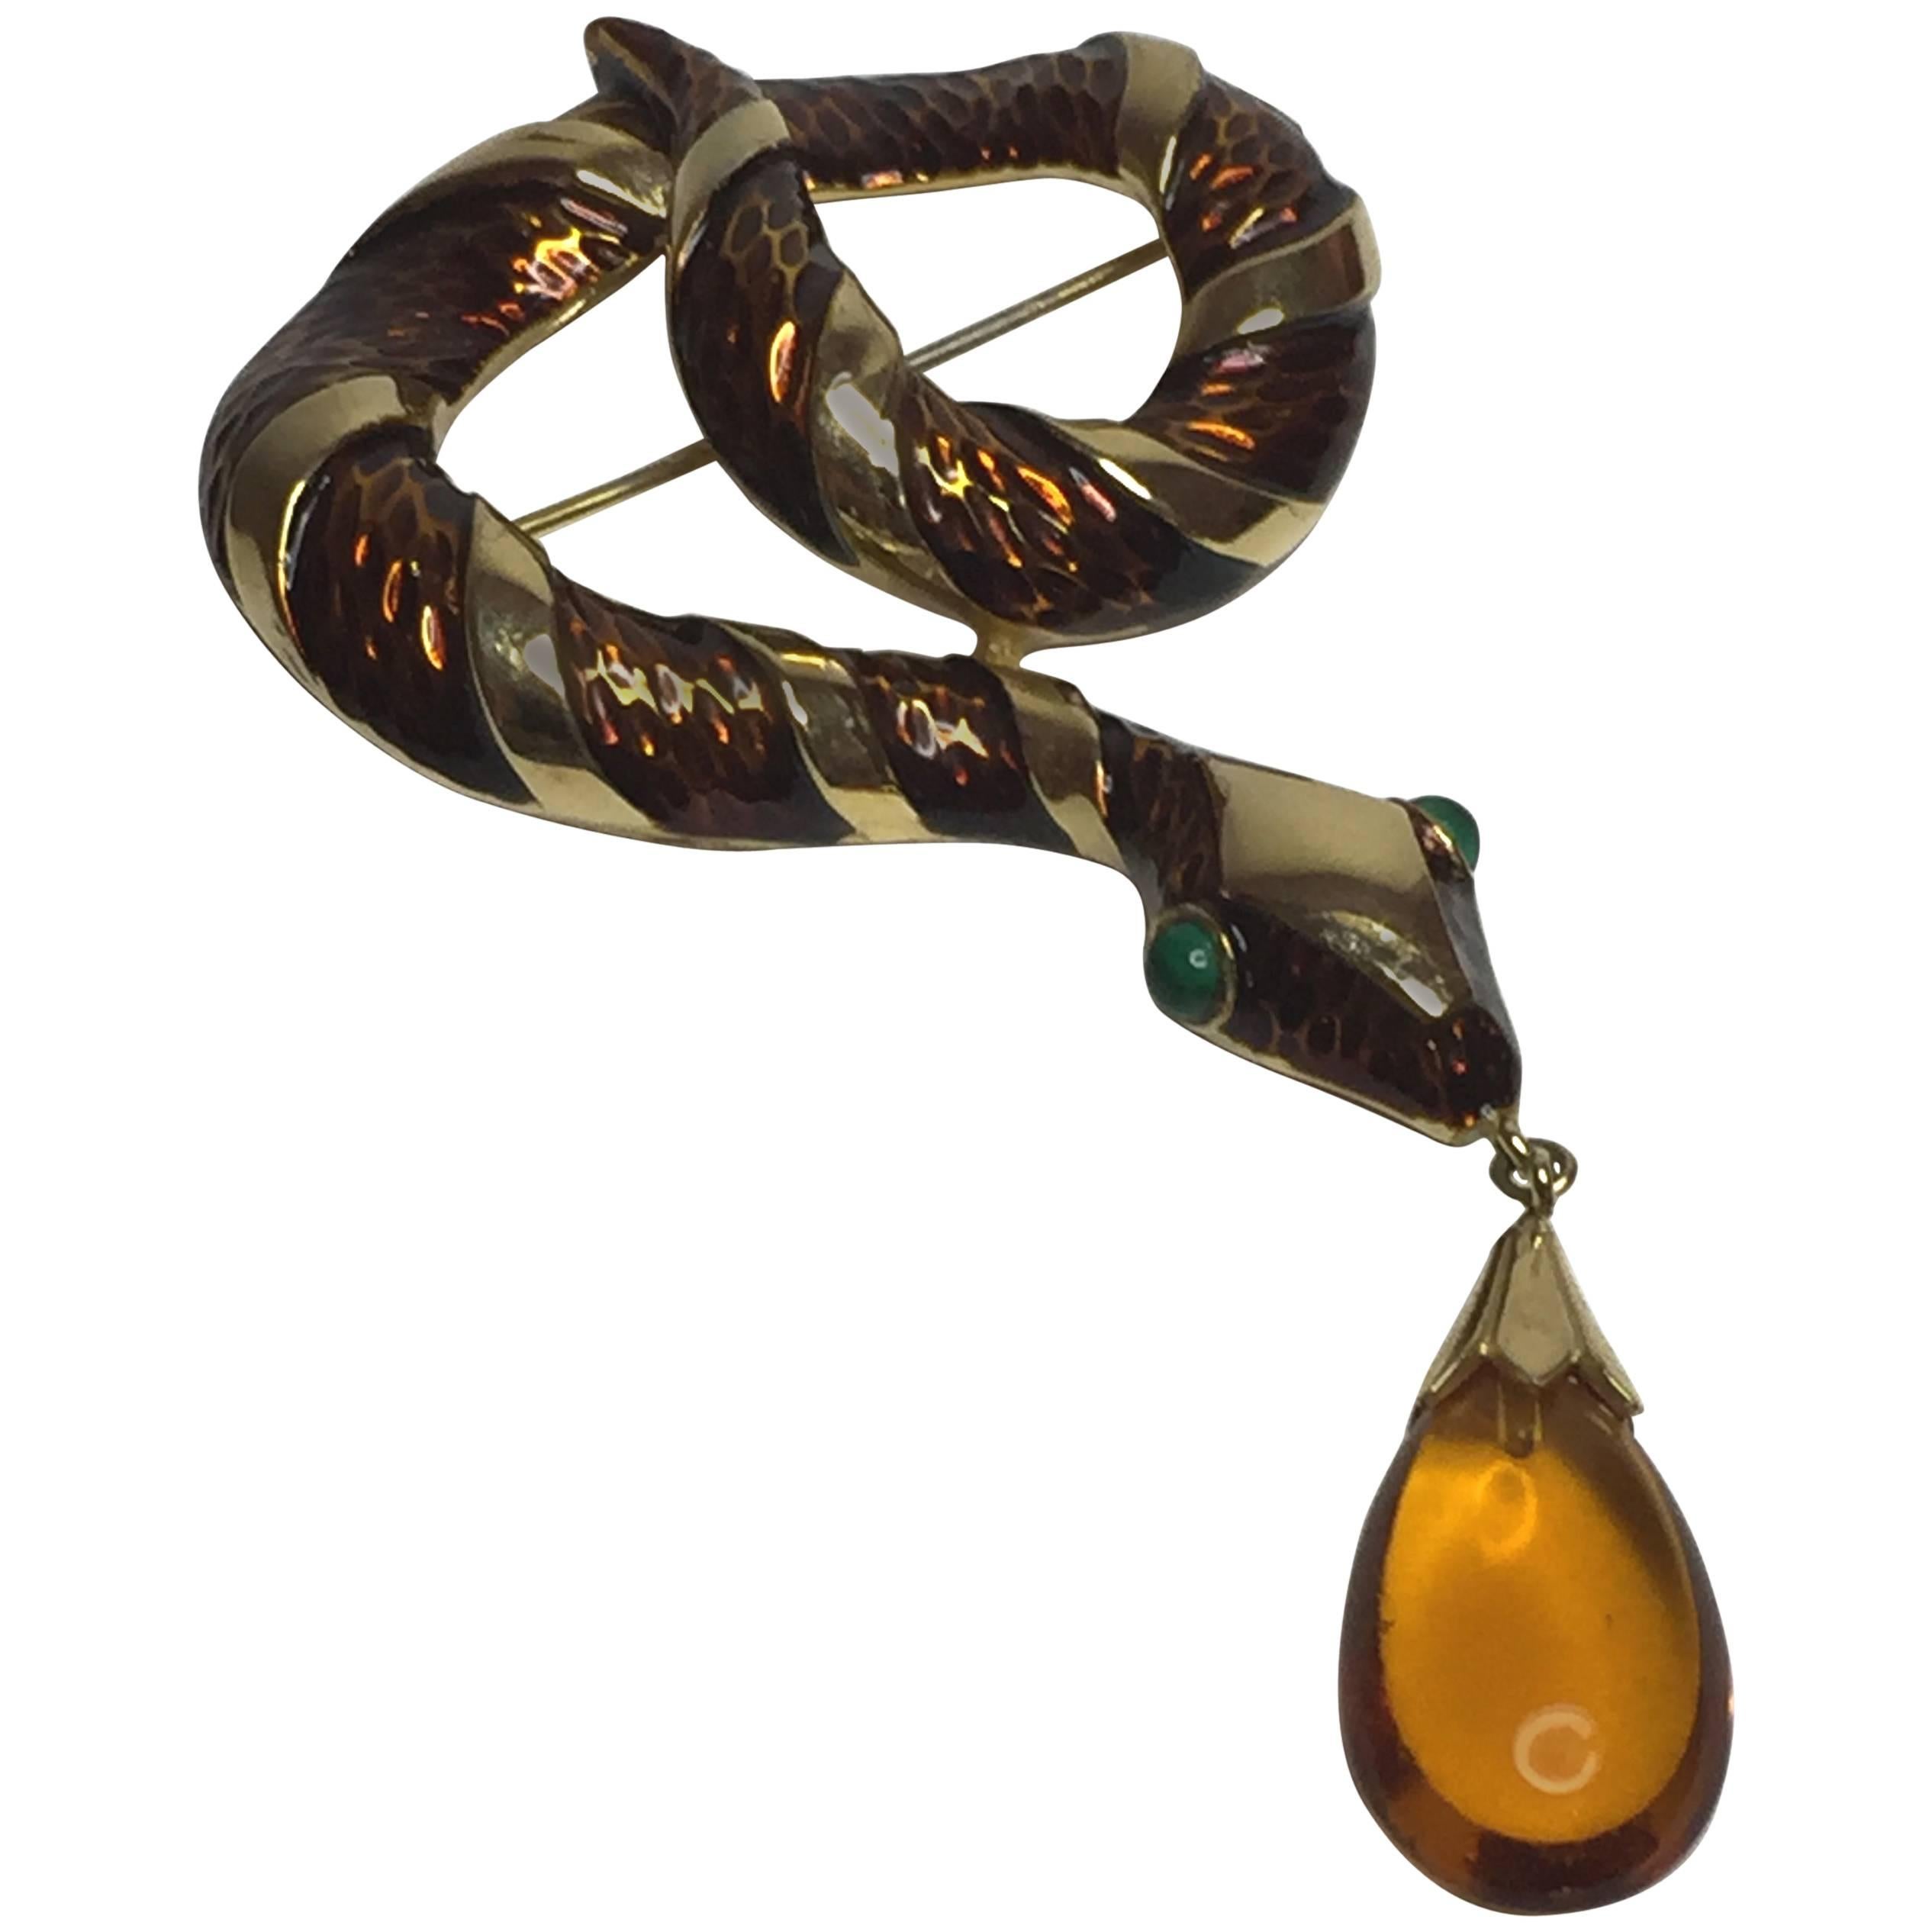 1960s TRIFARI Enamel & Goldtone Coiled Snake Brooch Pin with Amber Teardrop For Sale